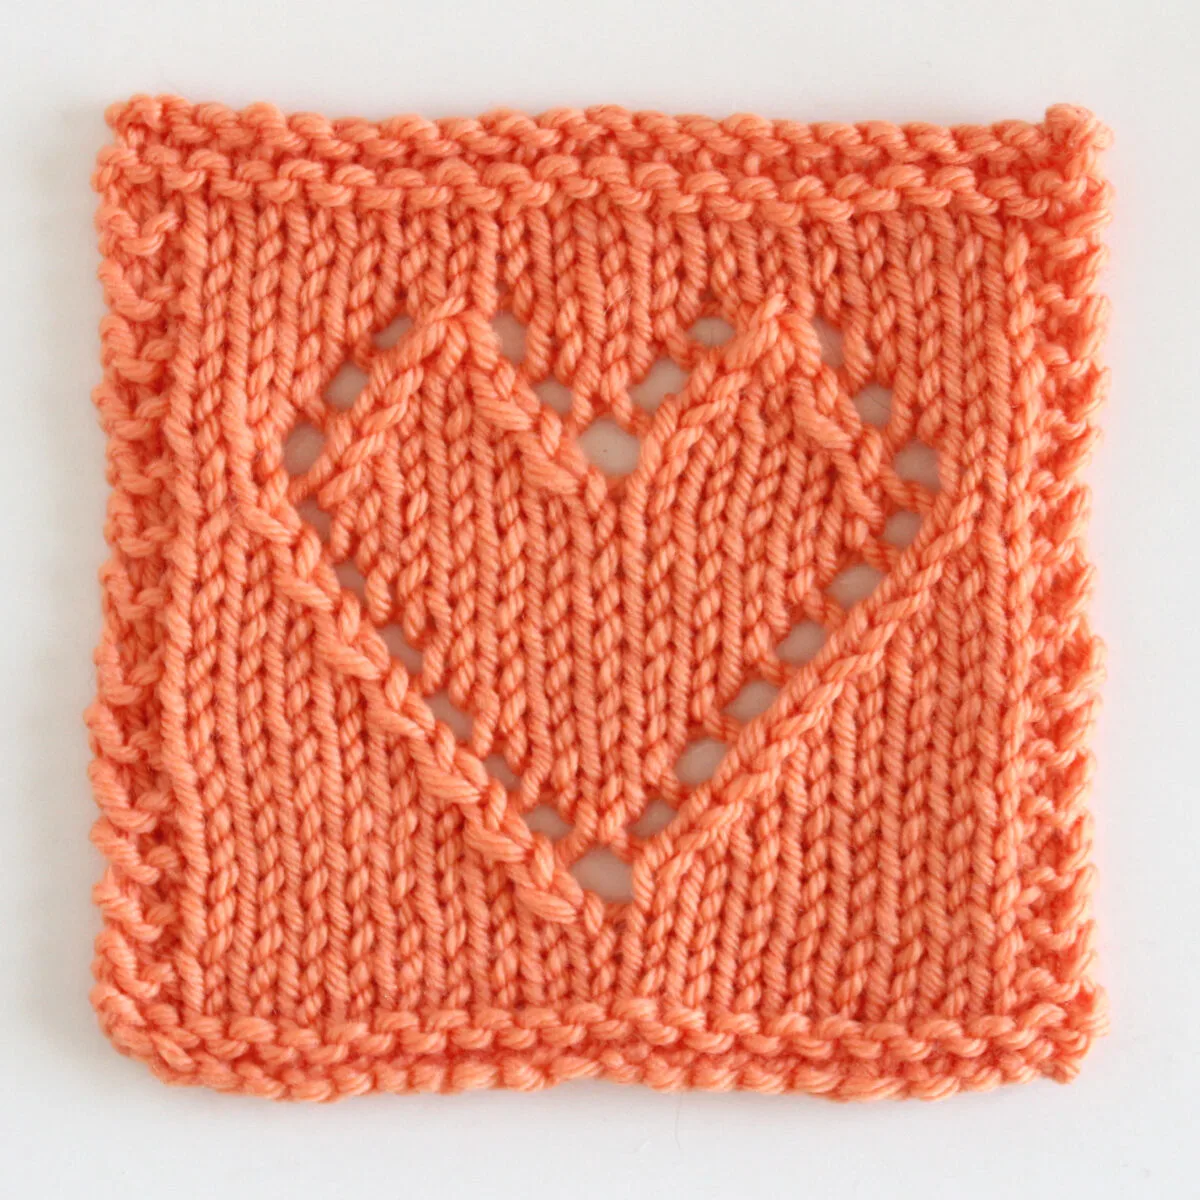 Knitted heart square in lace eyelets with orange color yarn.